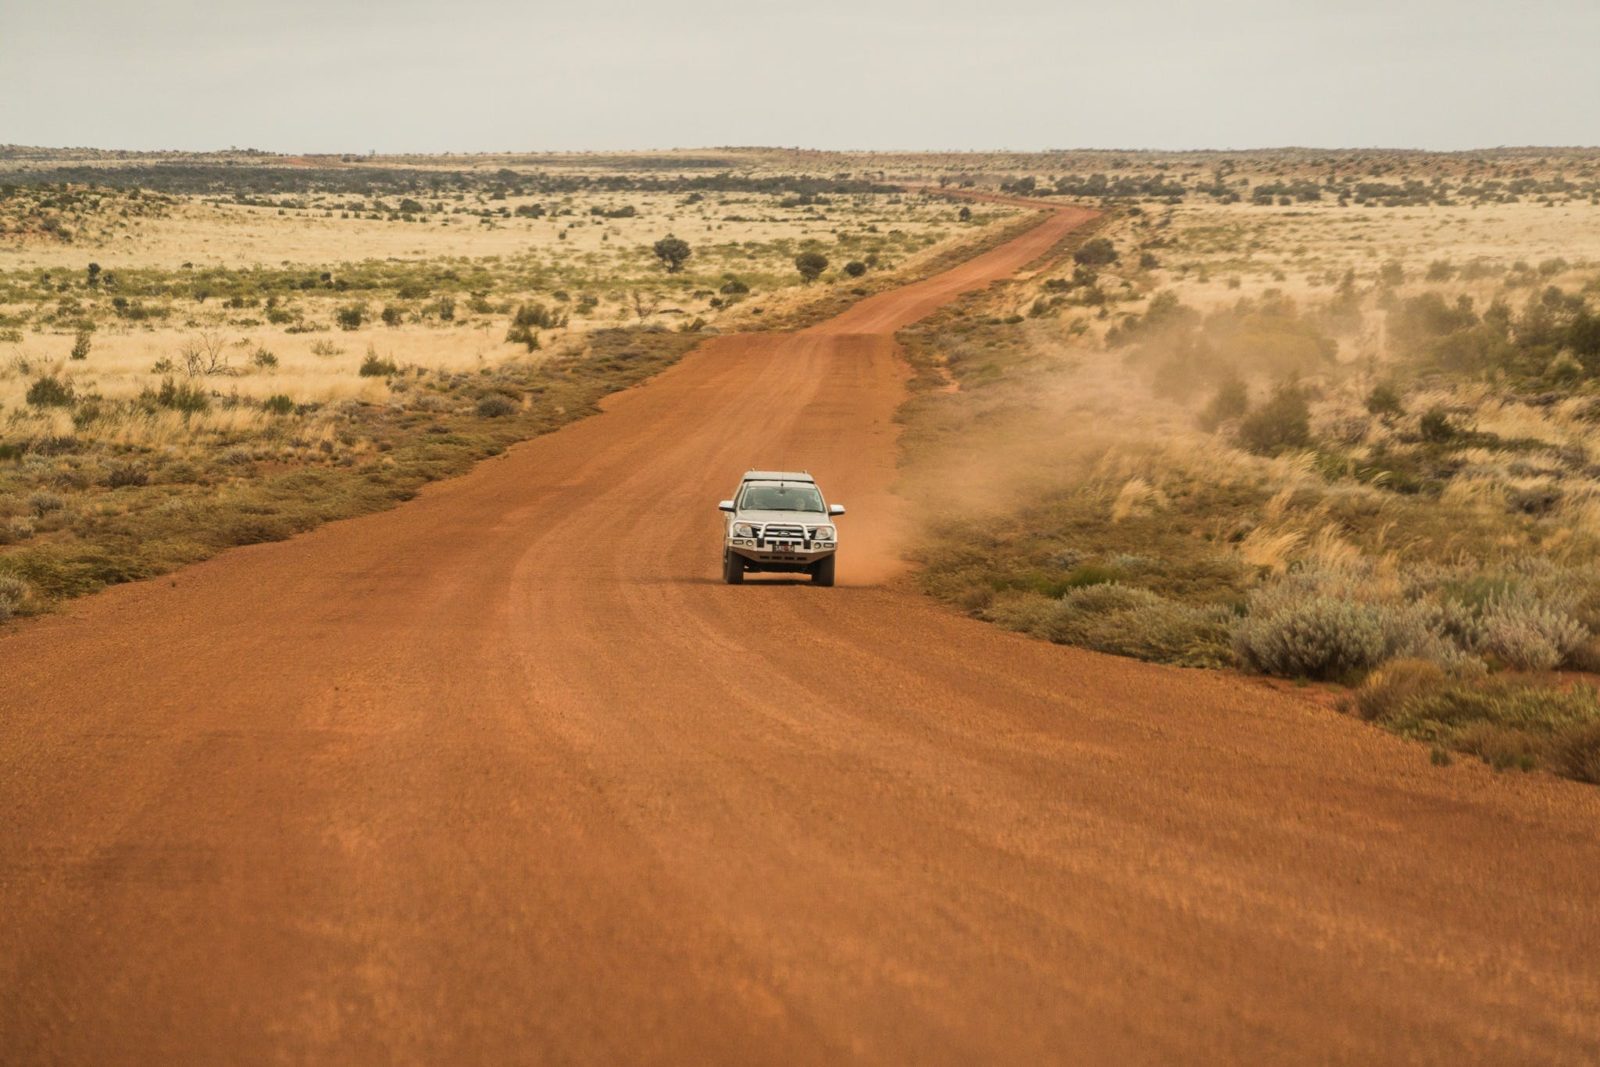 Travelling the Outback Way